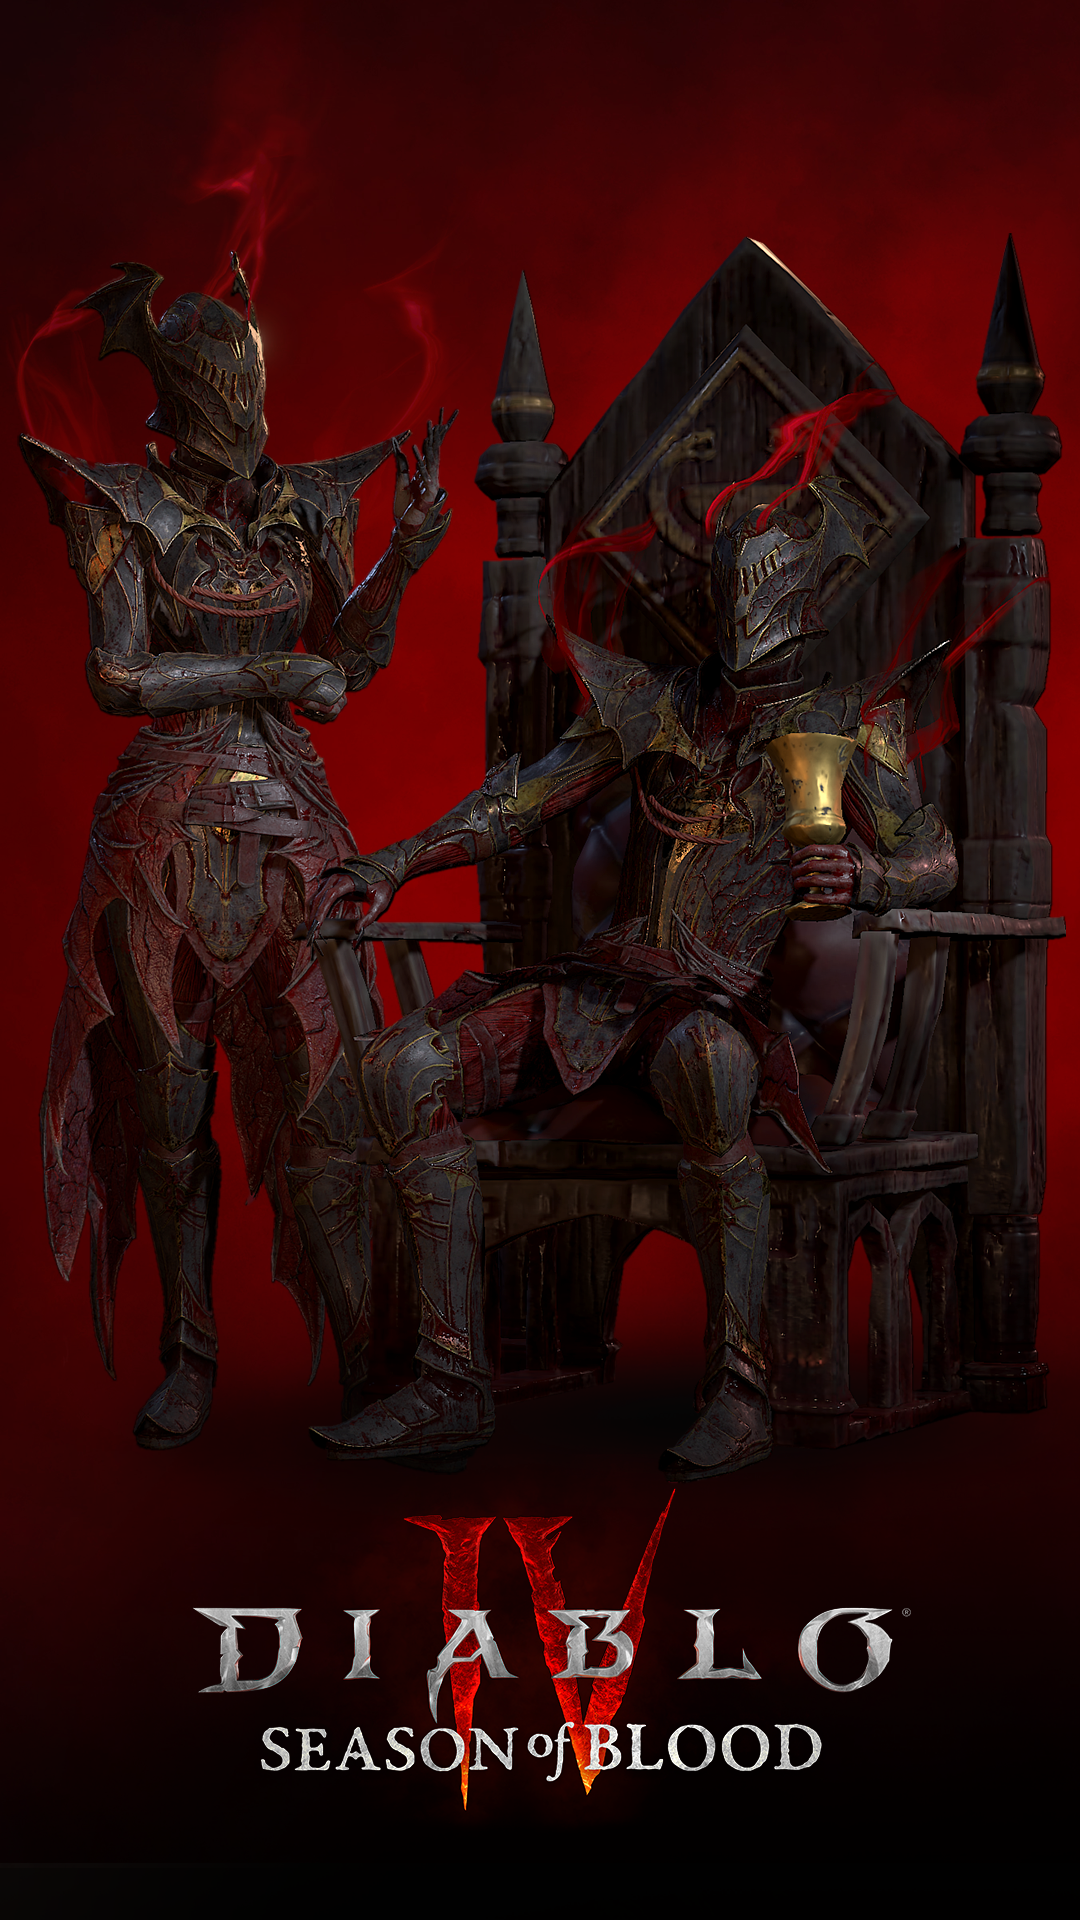 Diablo IV: Season of Blood themed phone wallpaper featuring an intimidating armored character on a dark, eerie background.